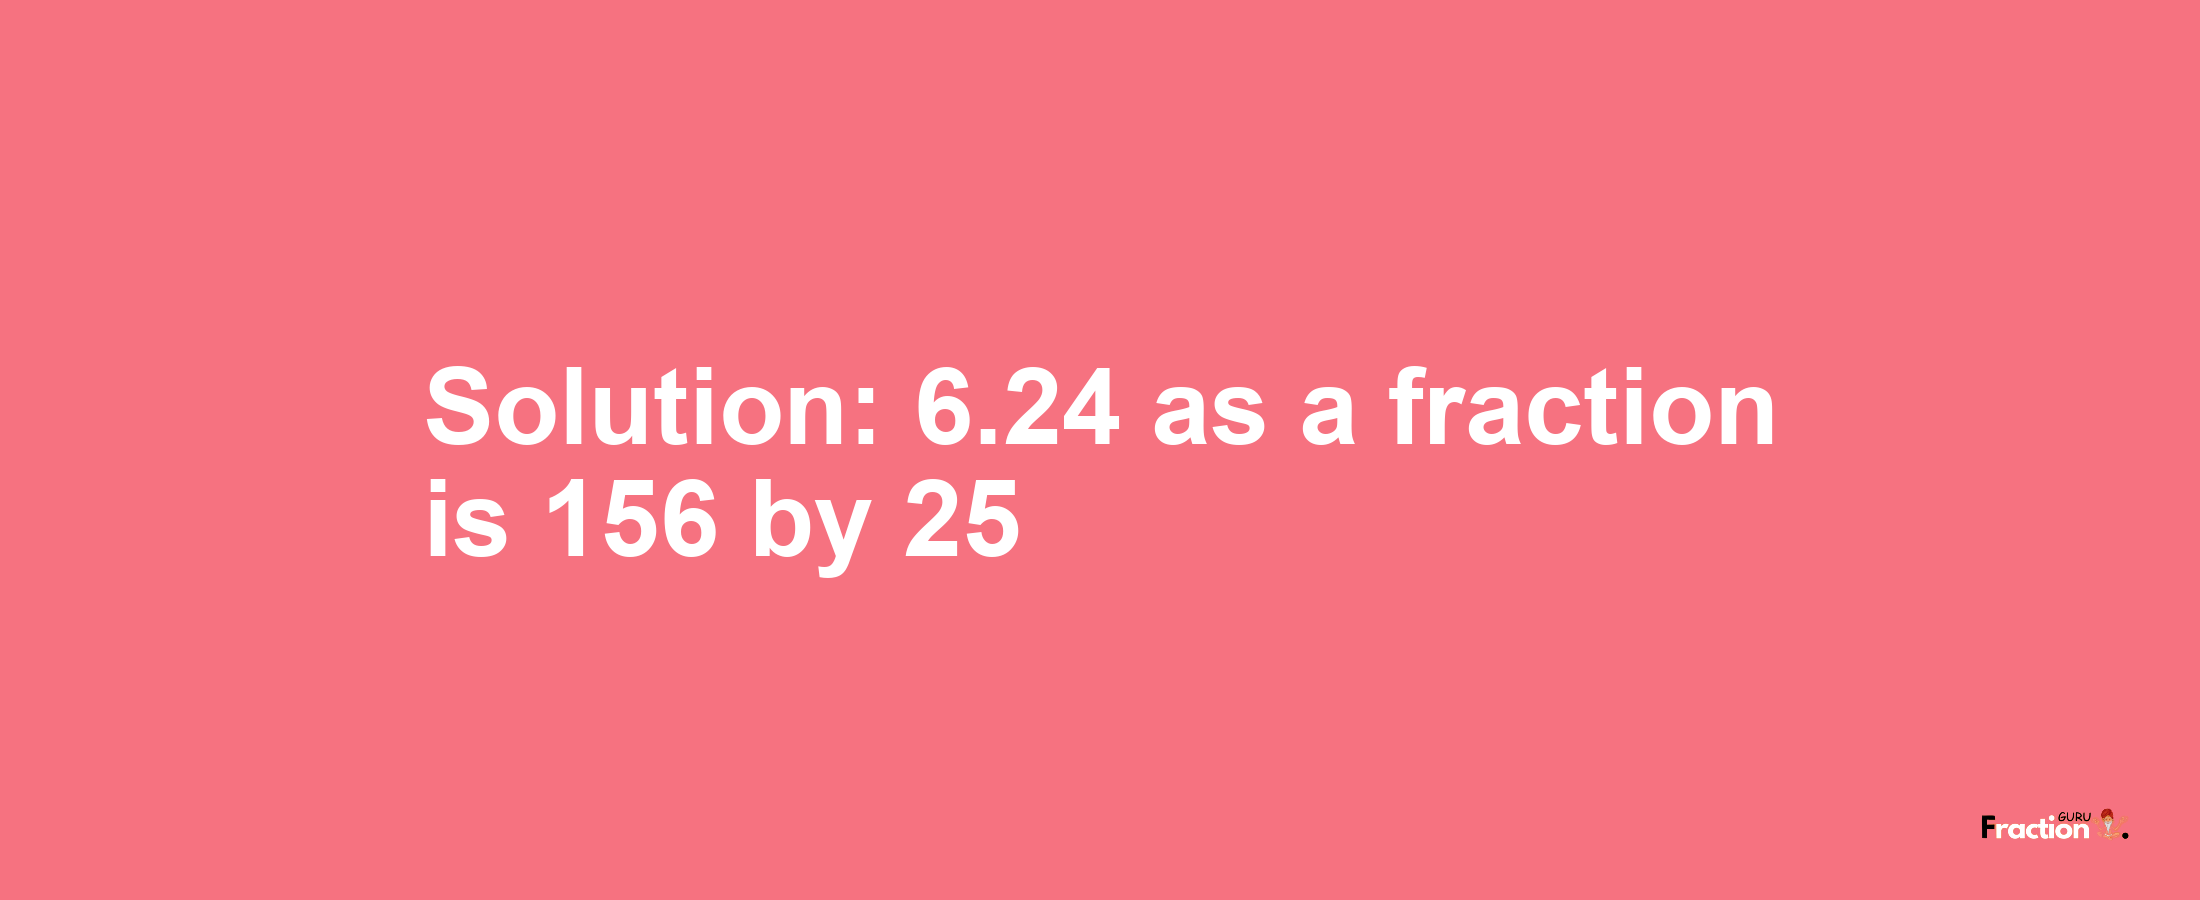 Solution:6.24 as a fraction is 156/25